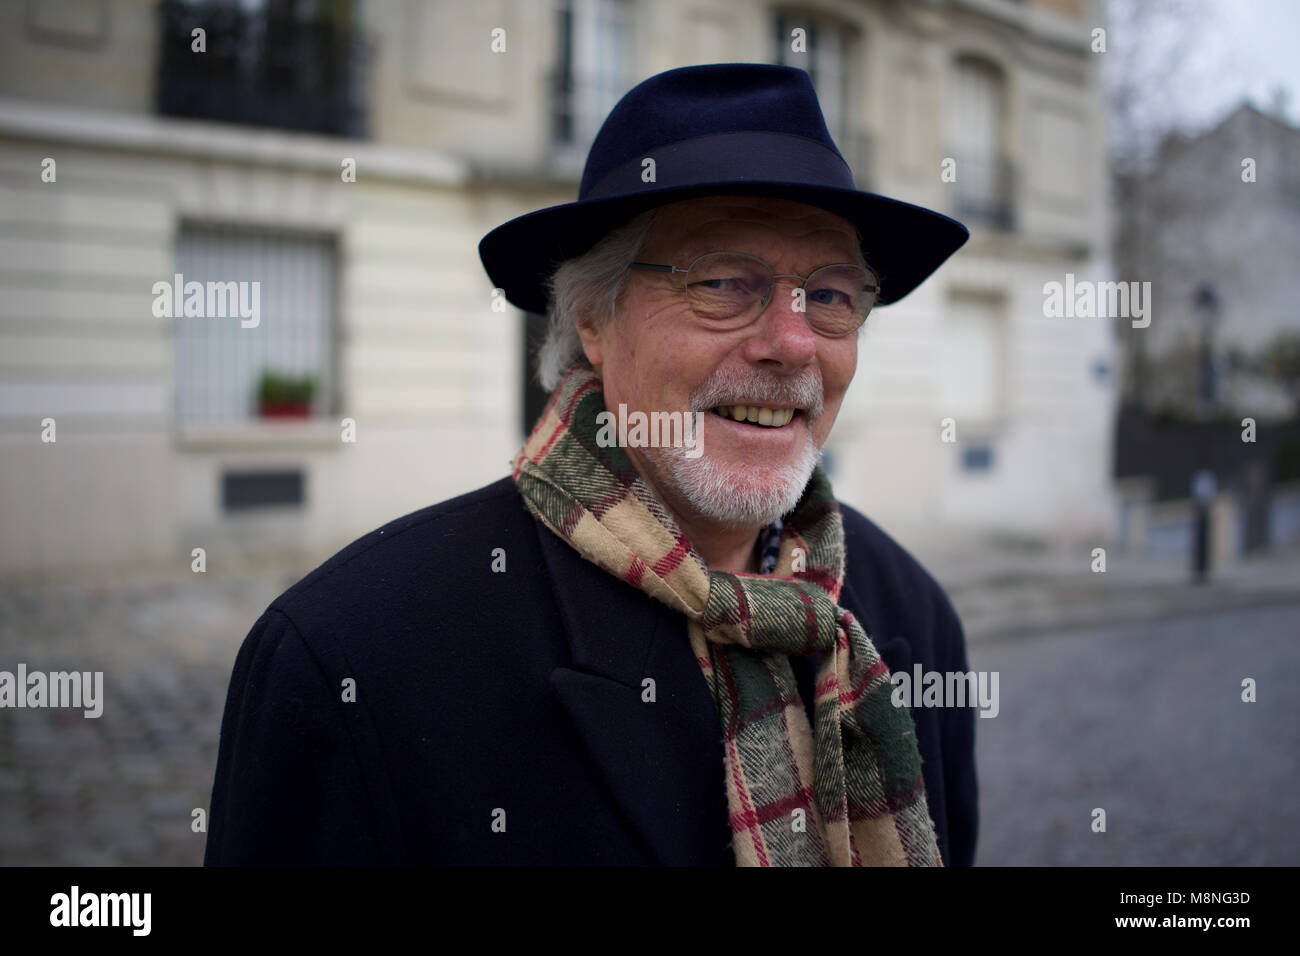 images Alamy and Man hi-res coat trilby stock and with - photography